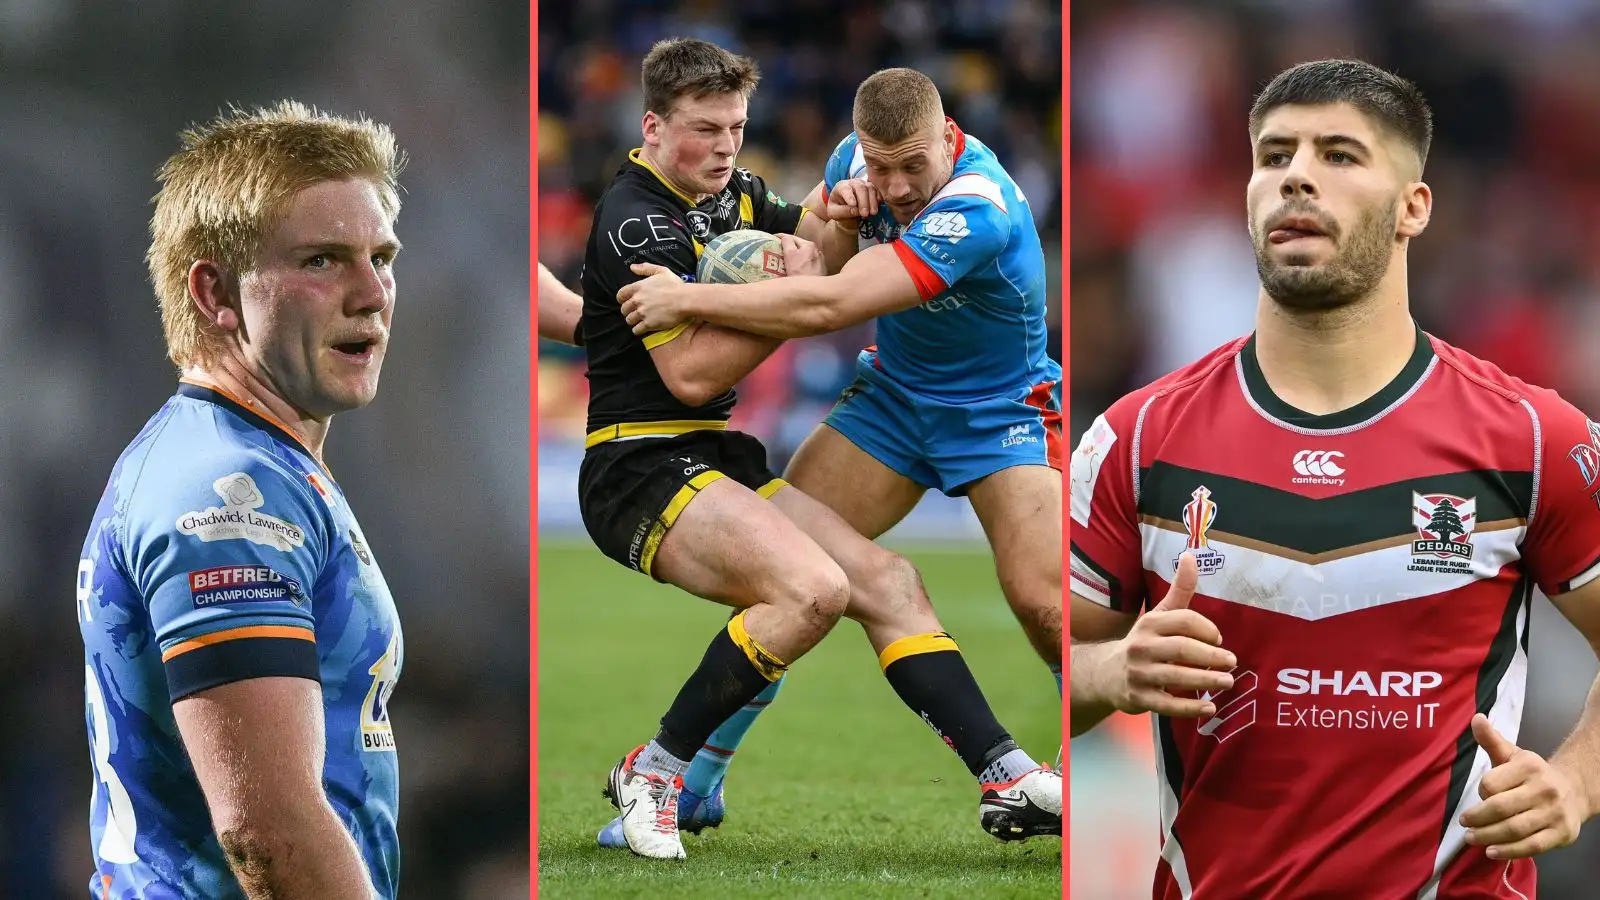 AJ Towse and 5 other Championship stars ready to make Super League step up for first time